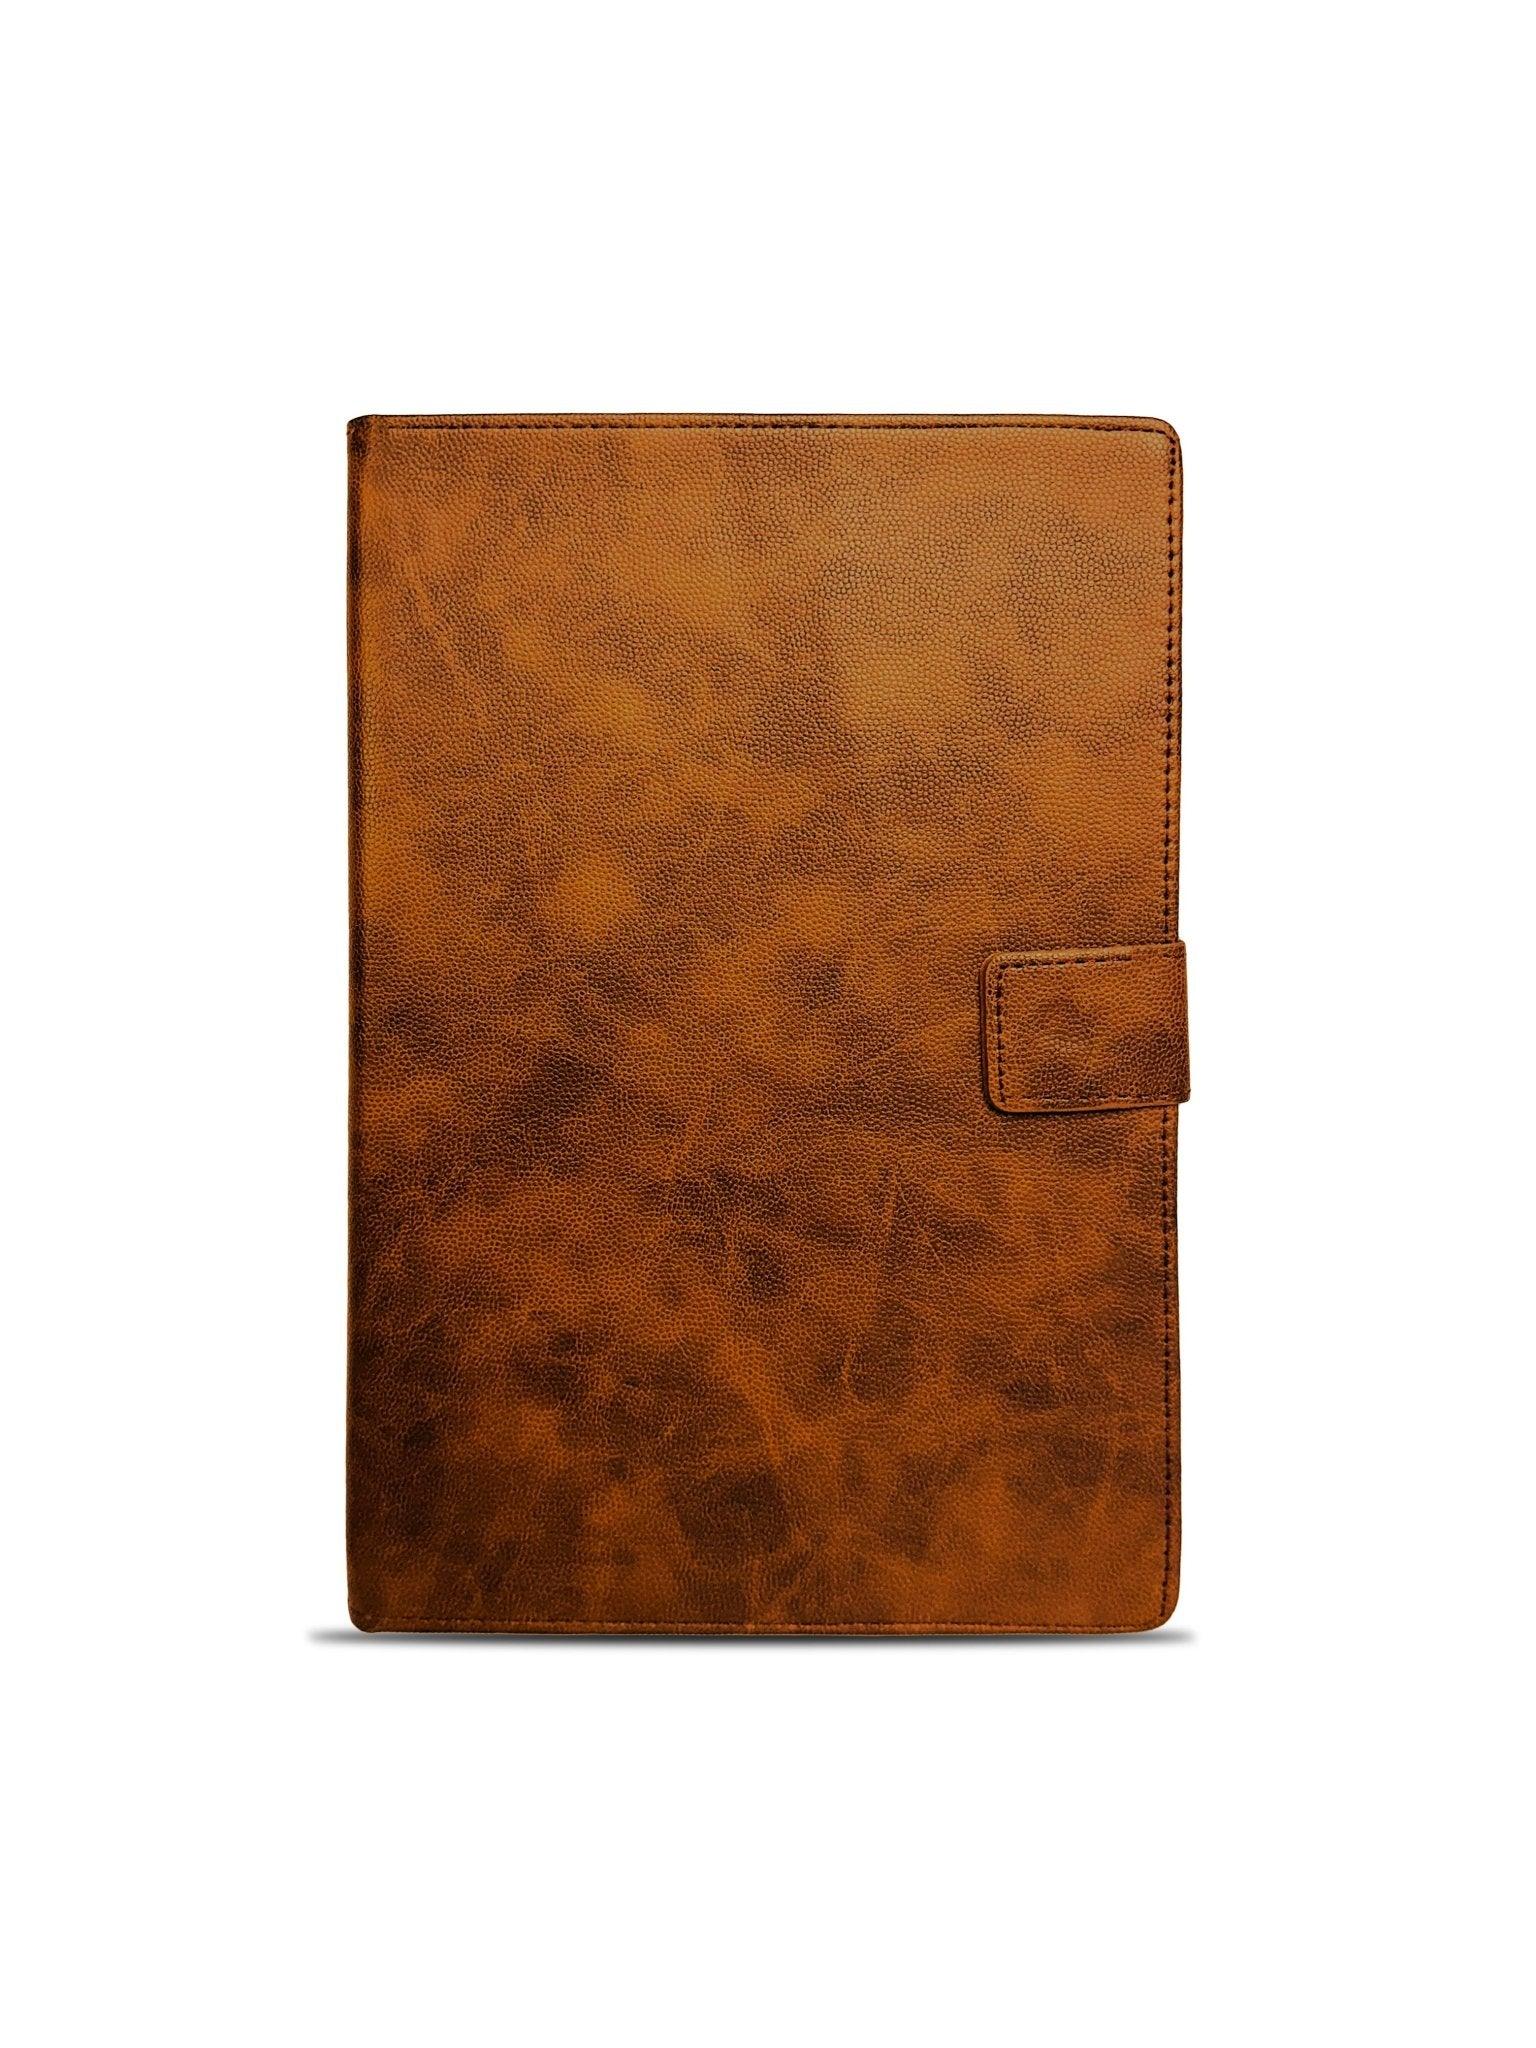 samsung-a8-flip-leather-protective-case-brown